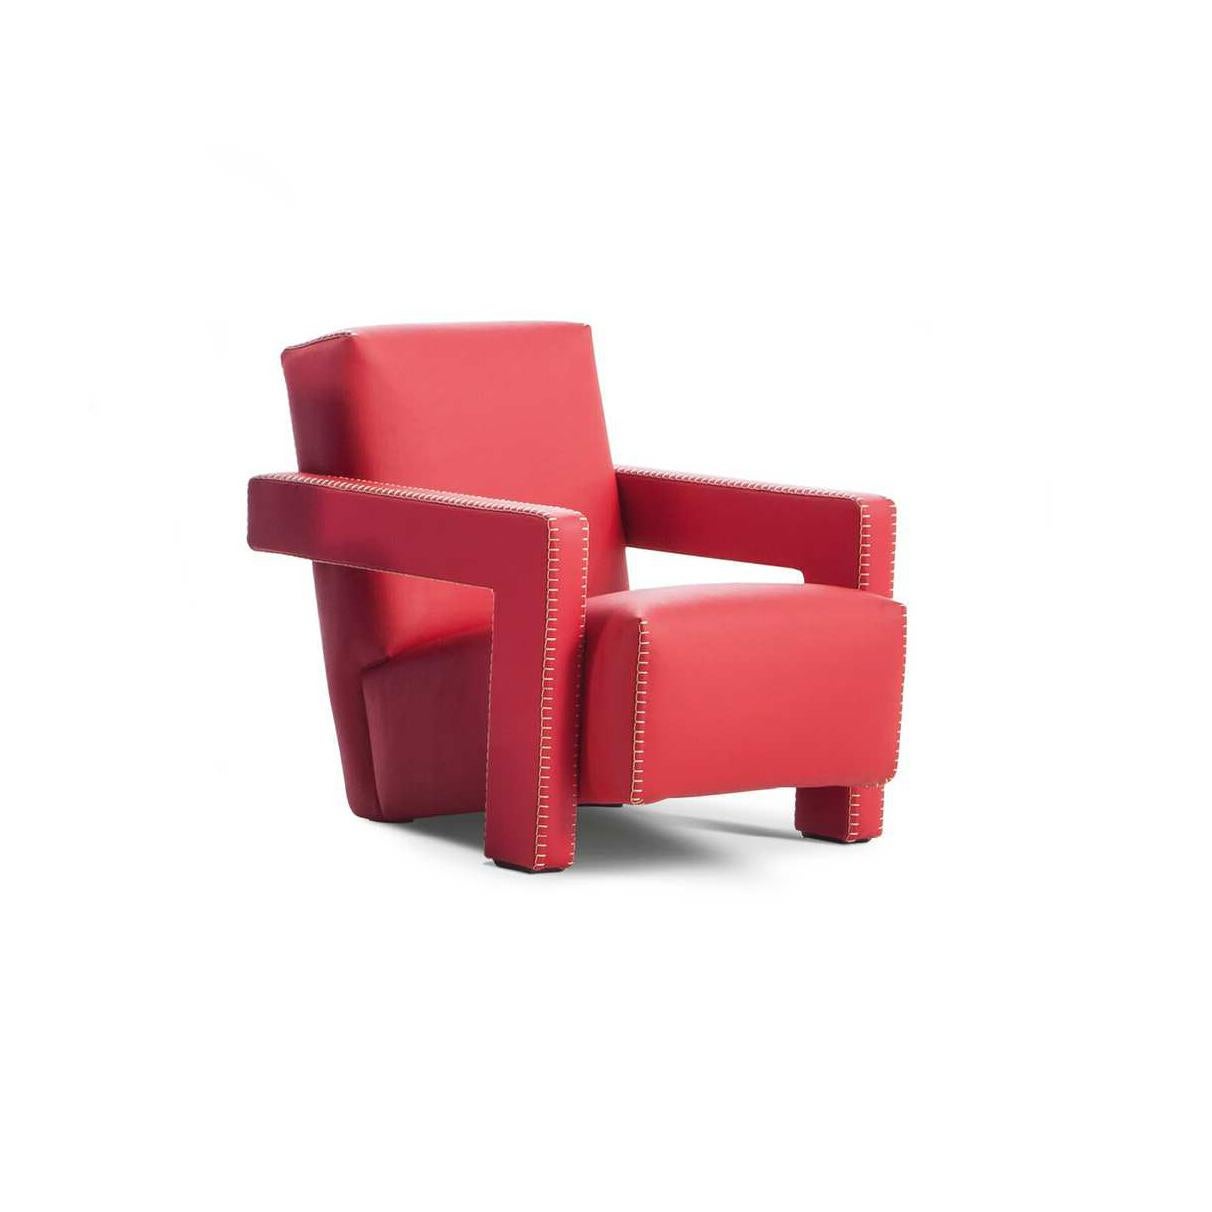 Armchair designed by Gerrit Thomas Rietveld in 1935. Relaunched in 2015.

Baby version.

Manufactured by Cassina in Italy.

Gerrit T. Rietveld came up with the design for the Utrecht armchair in 1935 while working for the Metz & Co. department